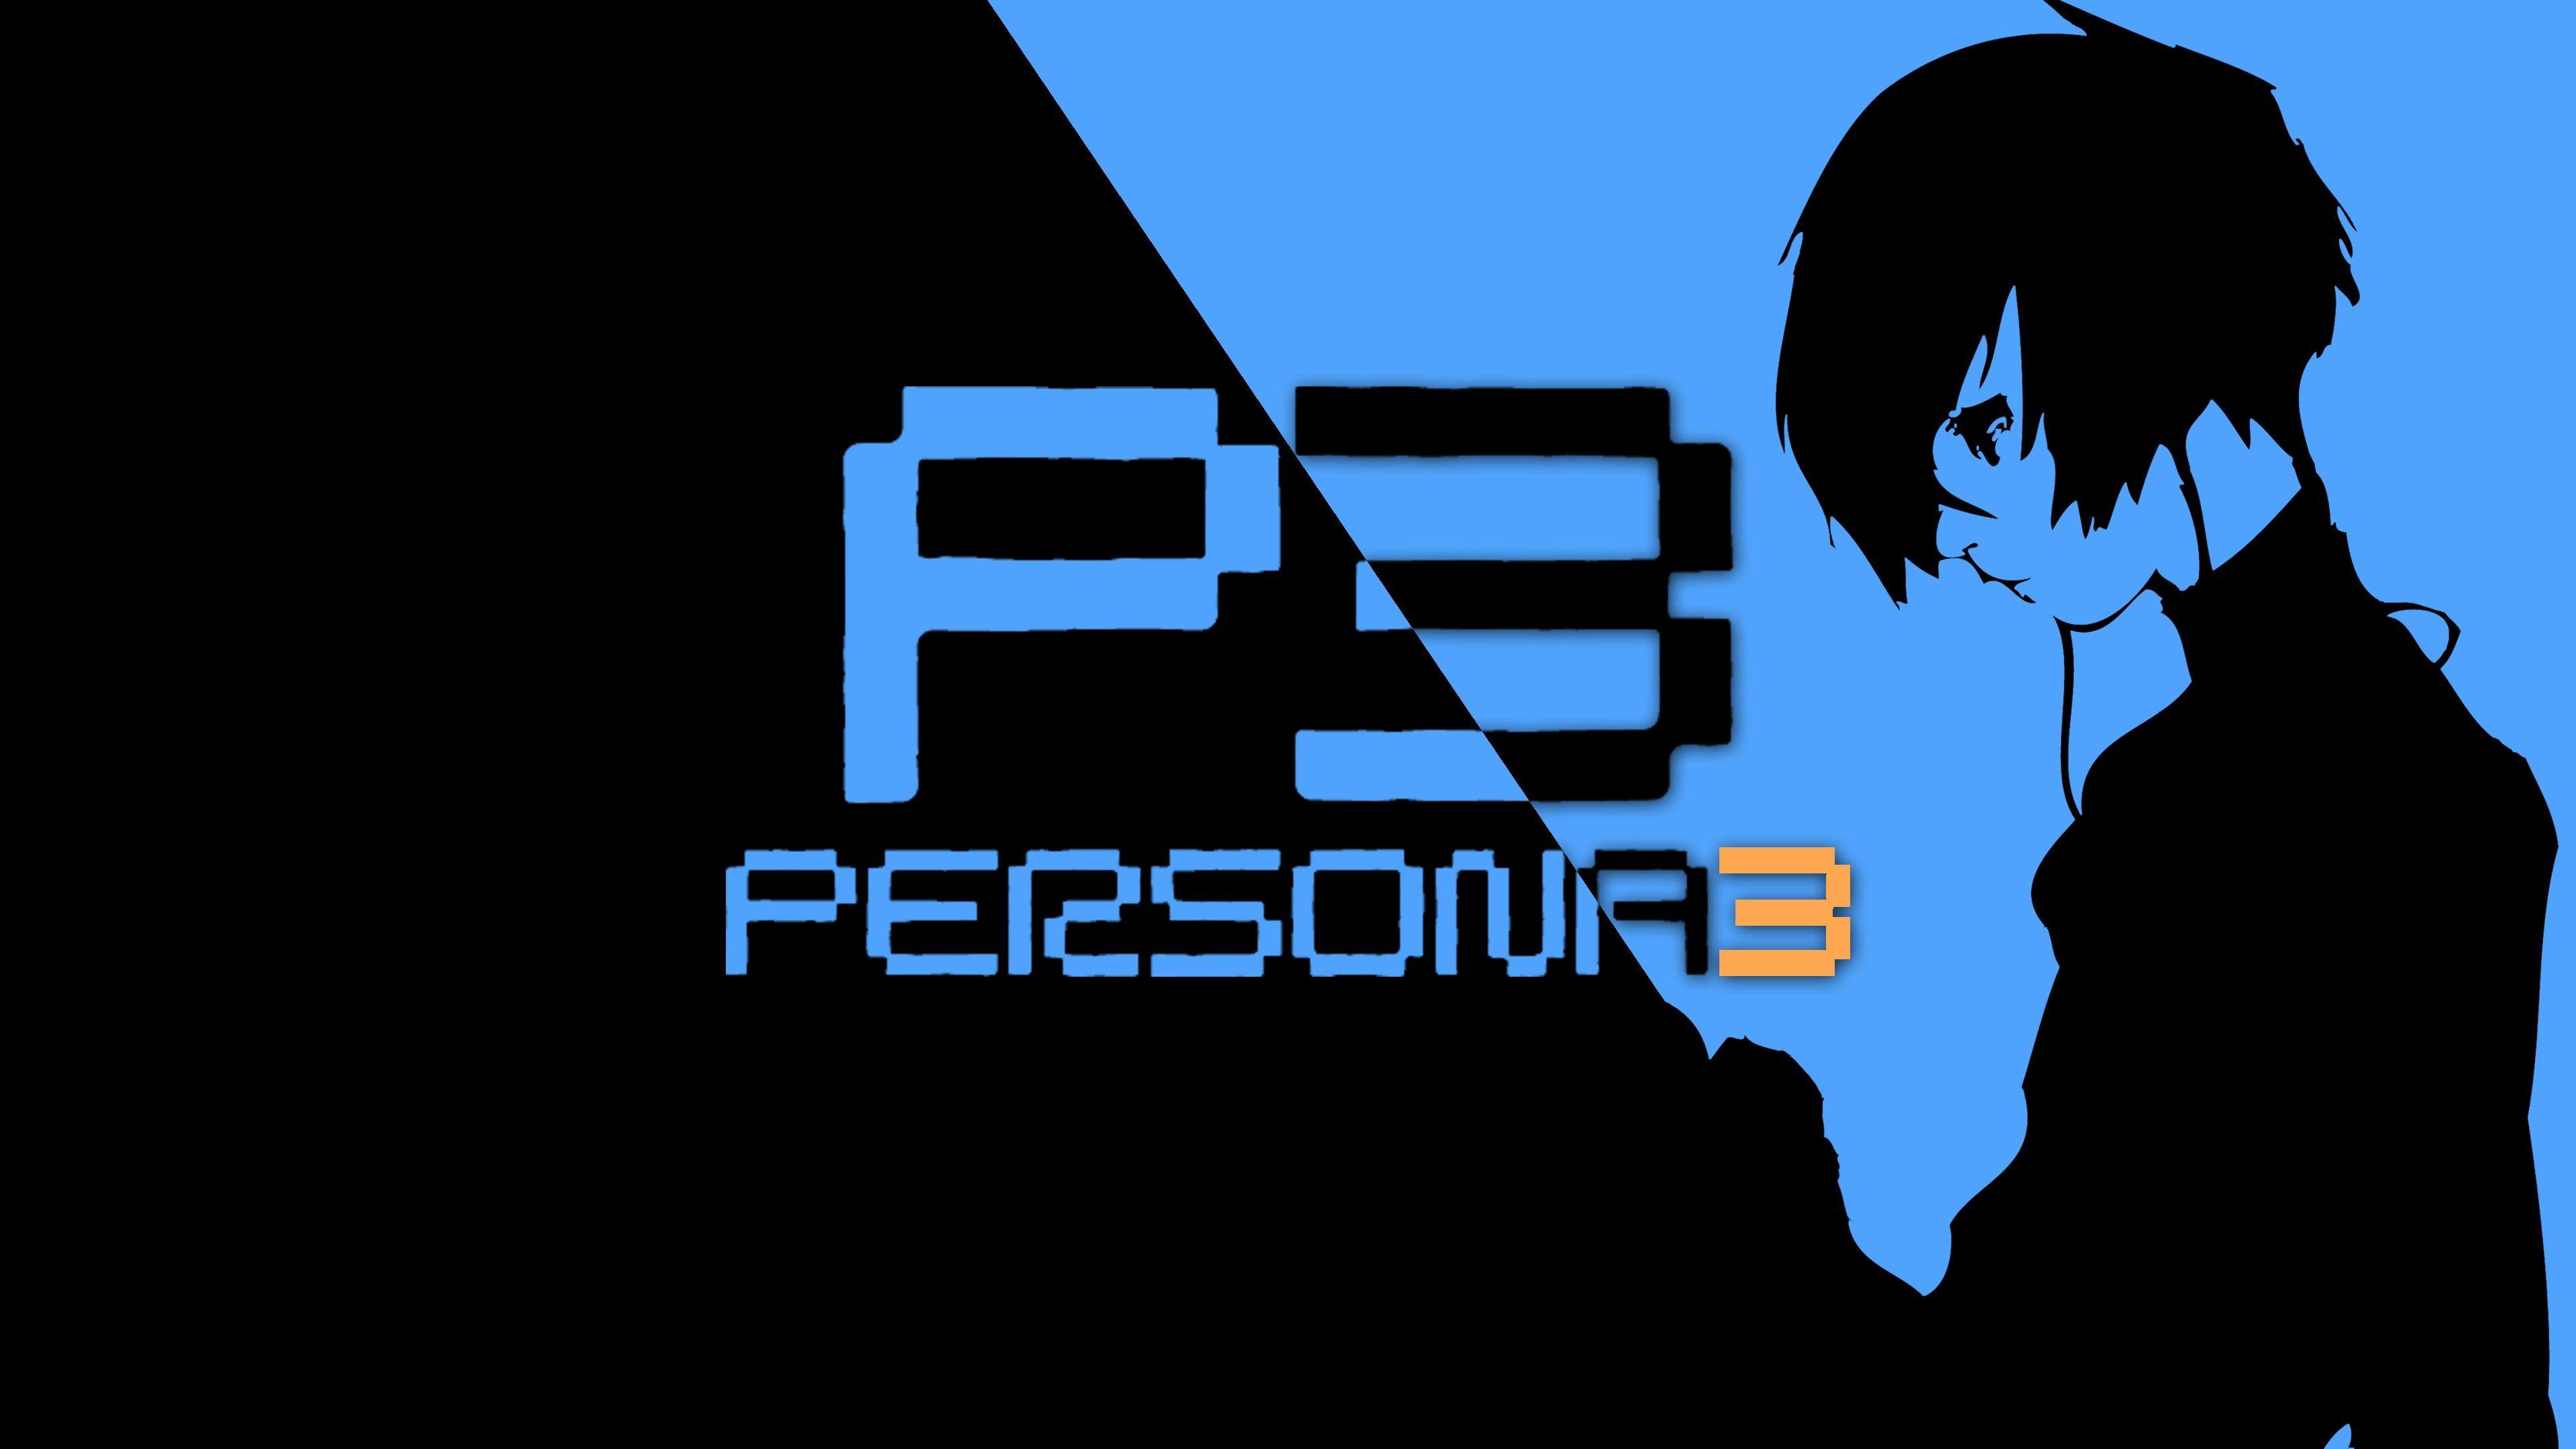 Persona 3 wallpaperDownload free cool full HD background